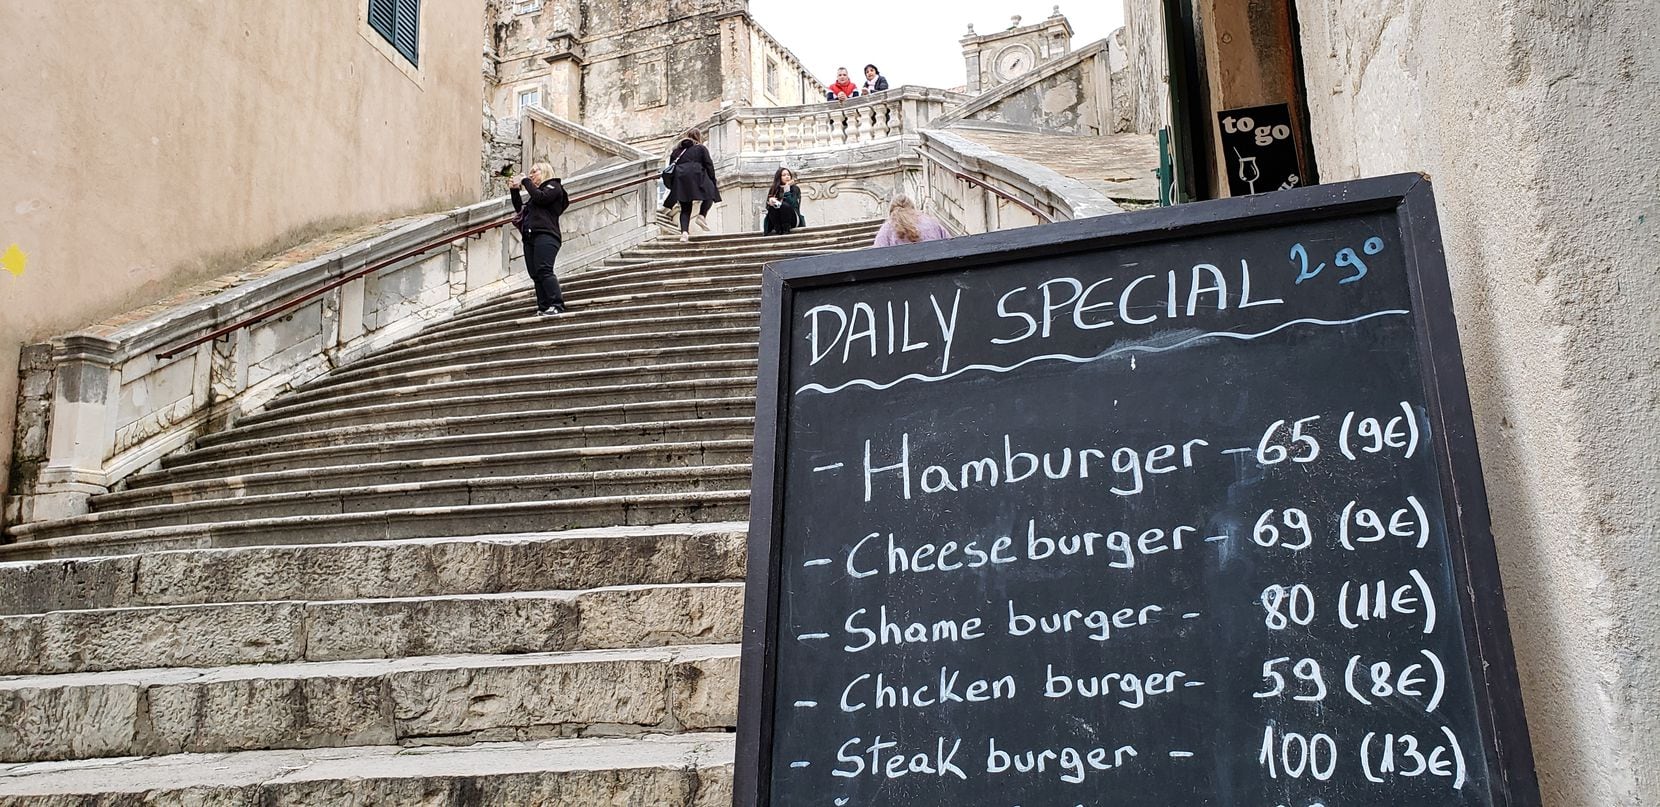 The Dubrovnik steps where Cersei Lannister made her famous walk of shame inspired a menu...